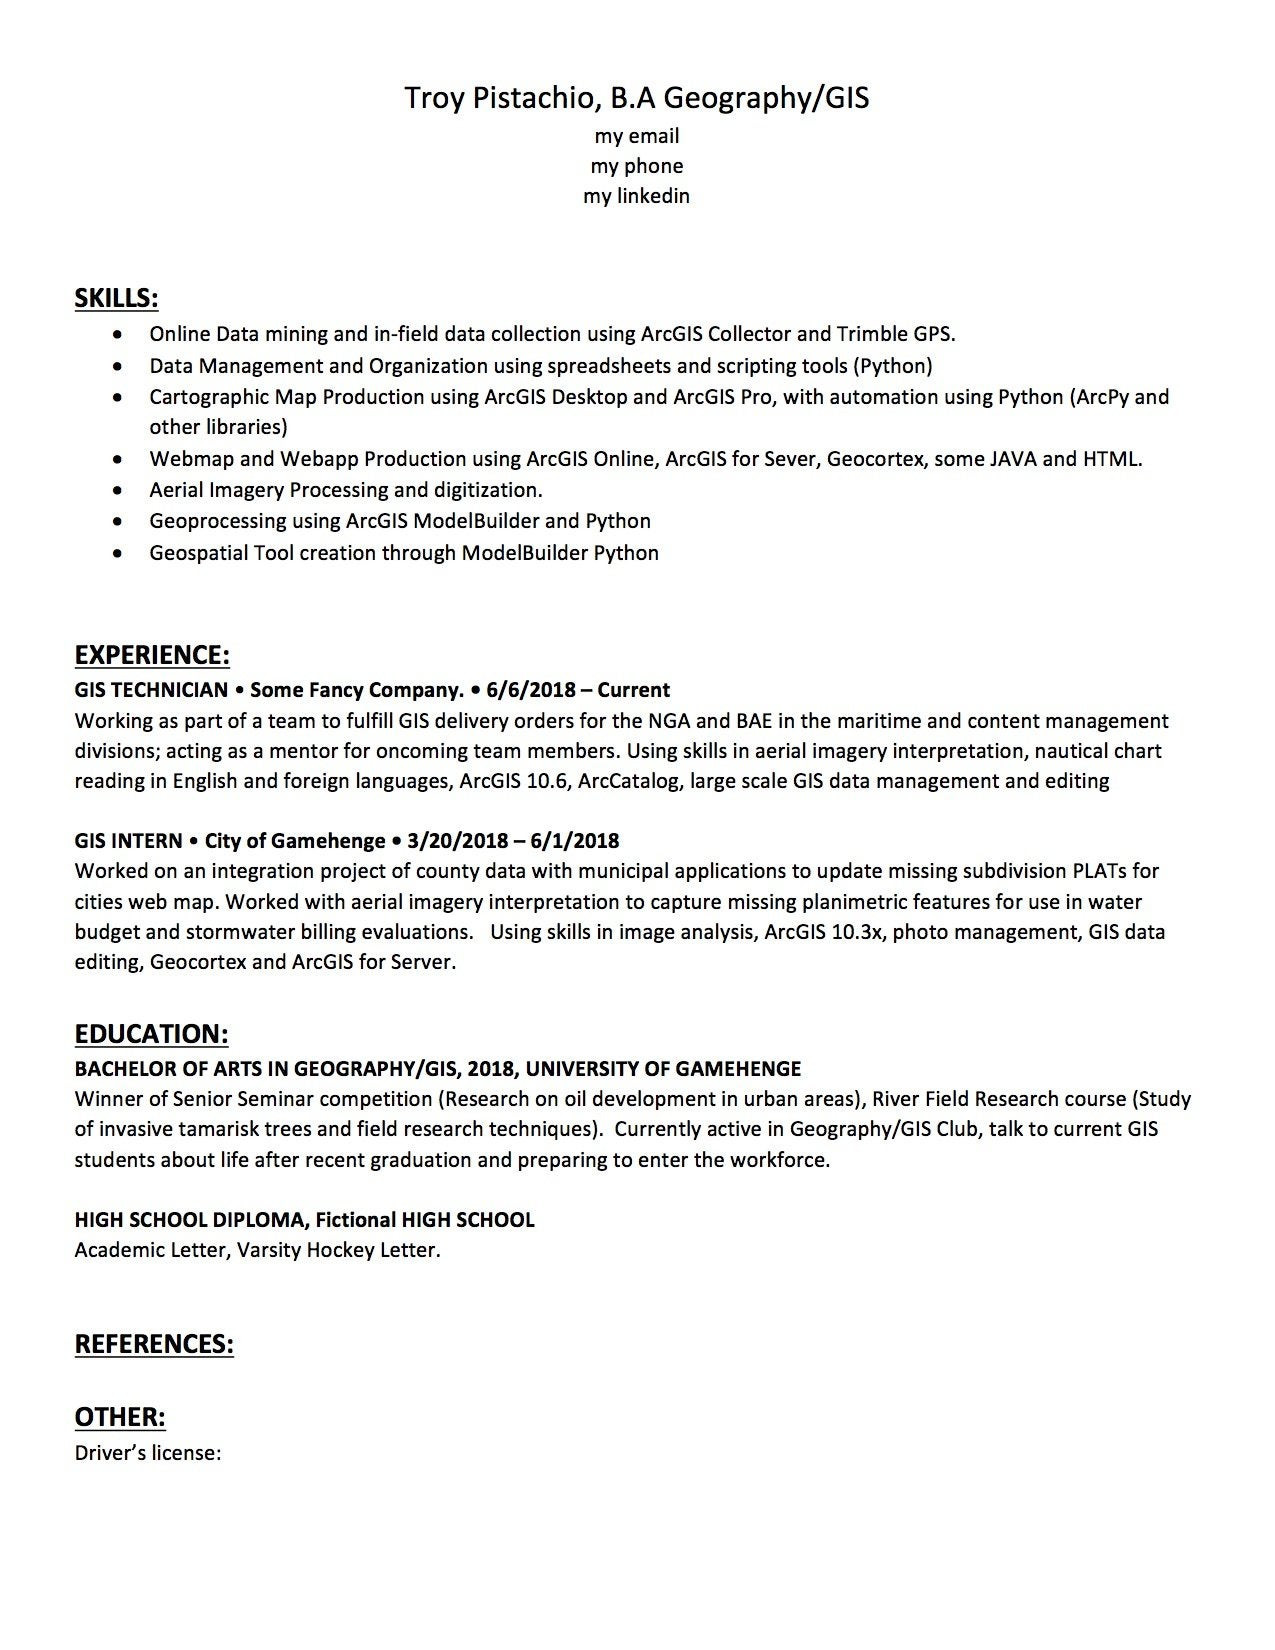 Gis Resume with No Experience Sample Gis Resume and Cover Letter Critique : R/gis